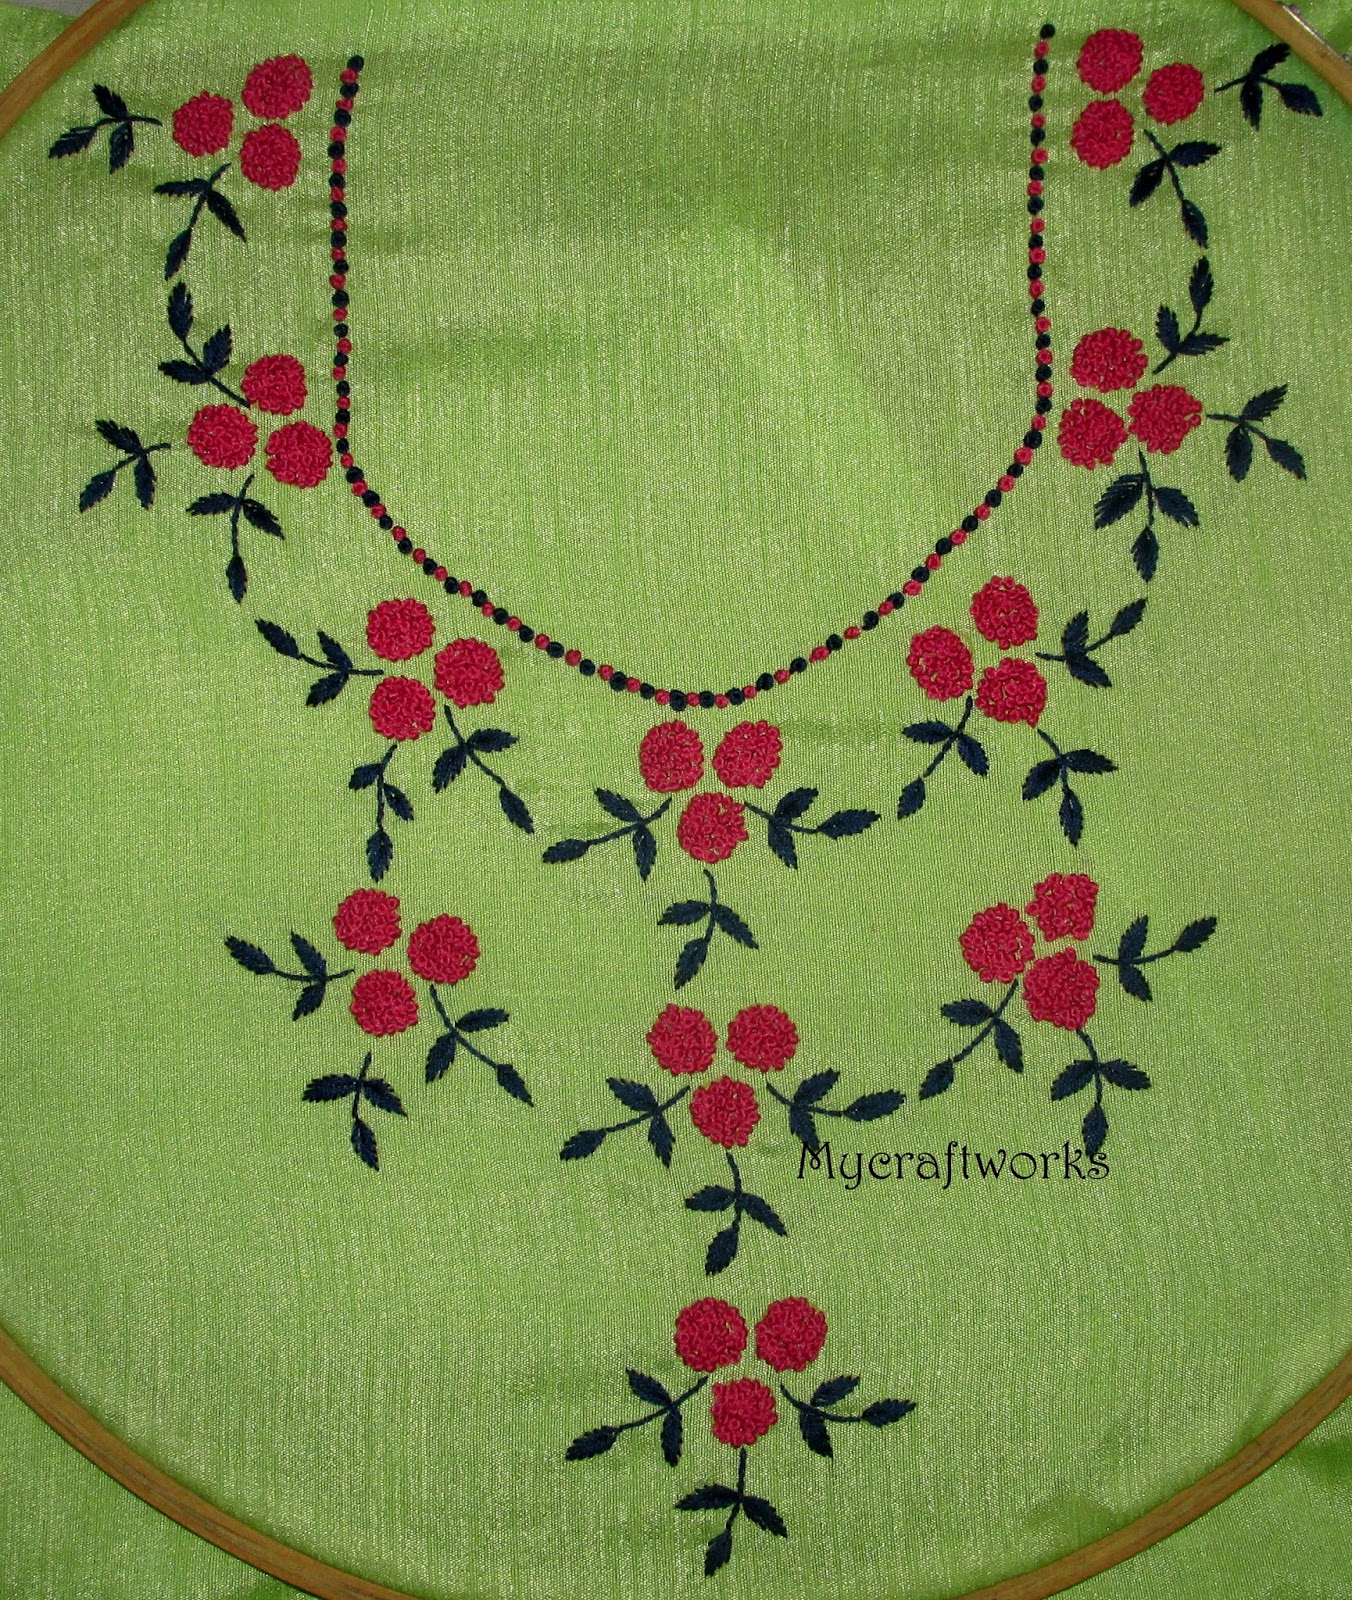 French Knot Embroidery Patterns My Craft Works Embroidery Pattern 4 French Knots Neck Design